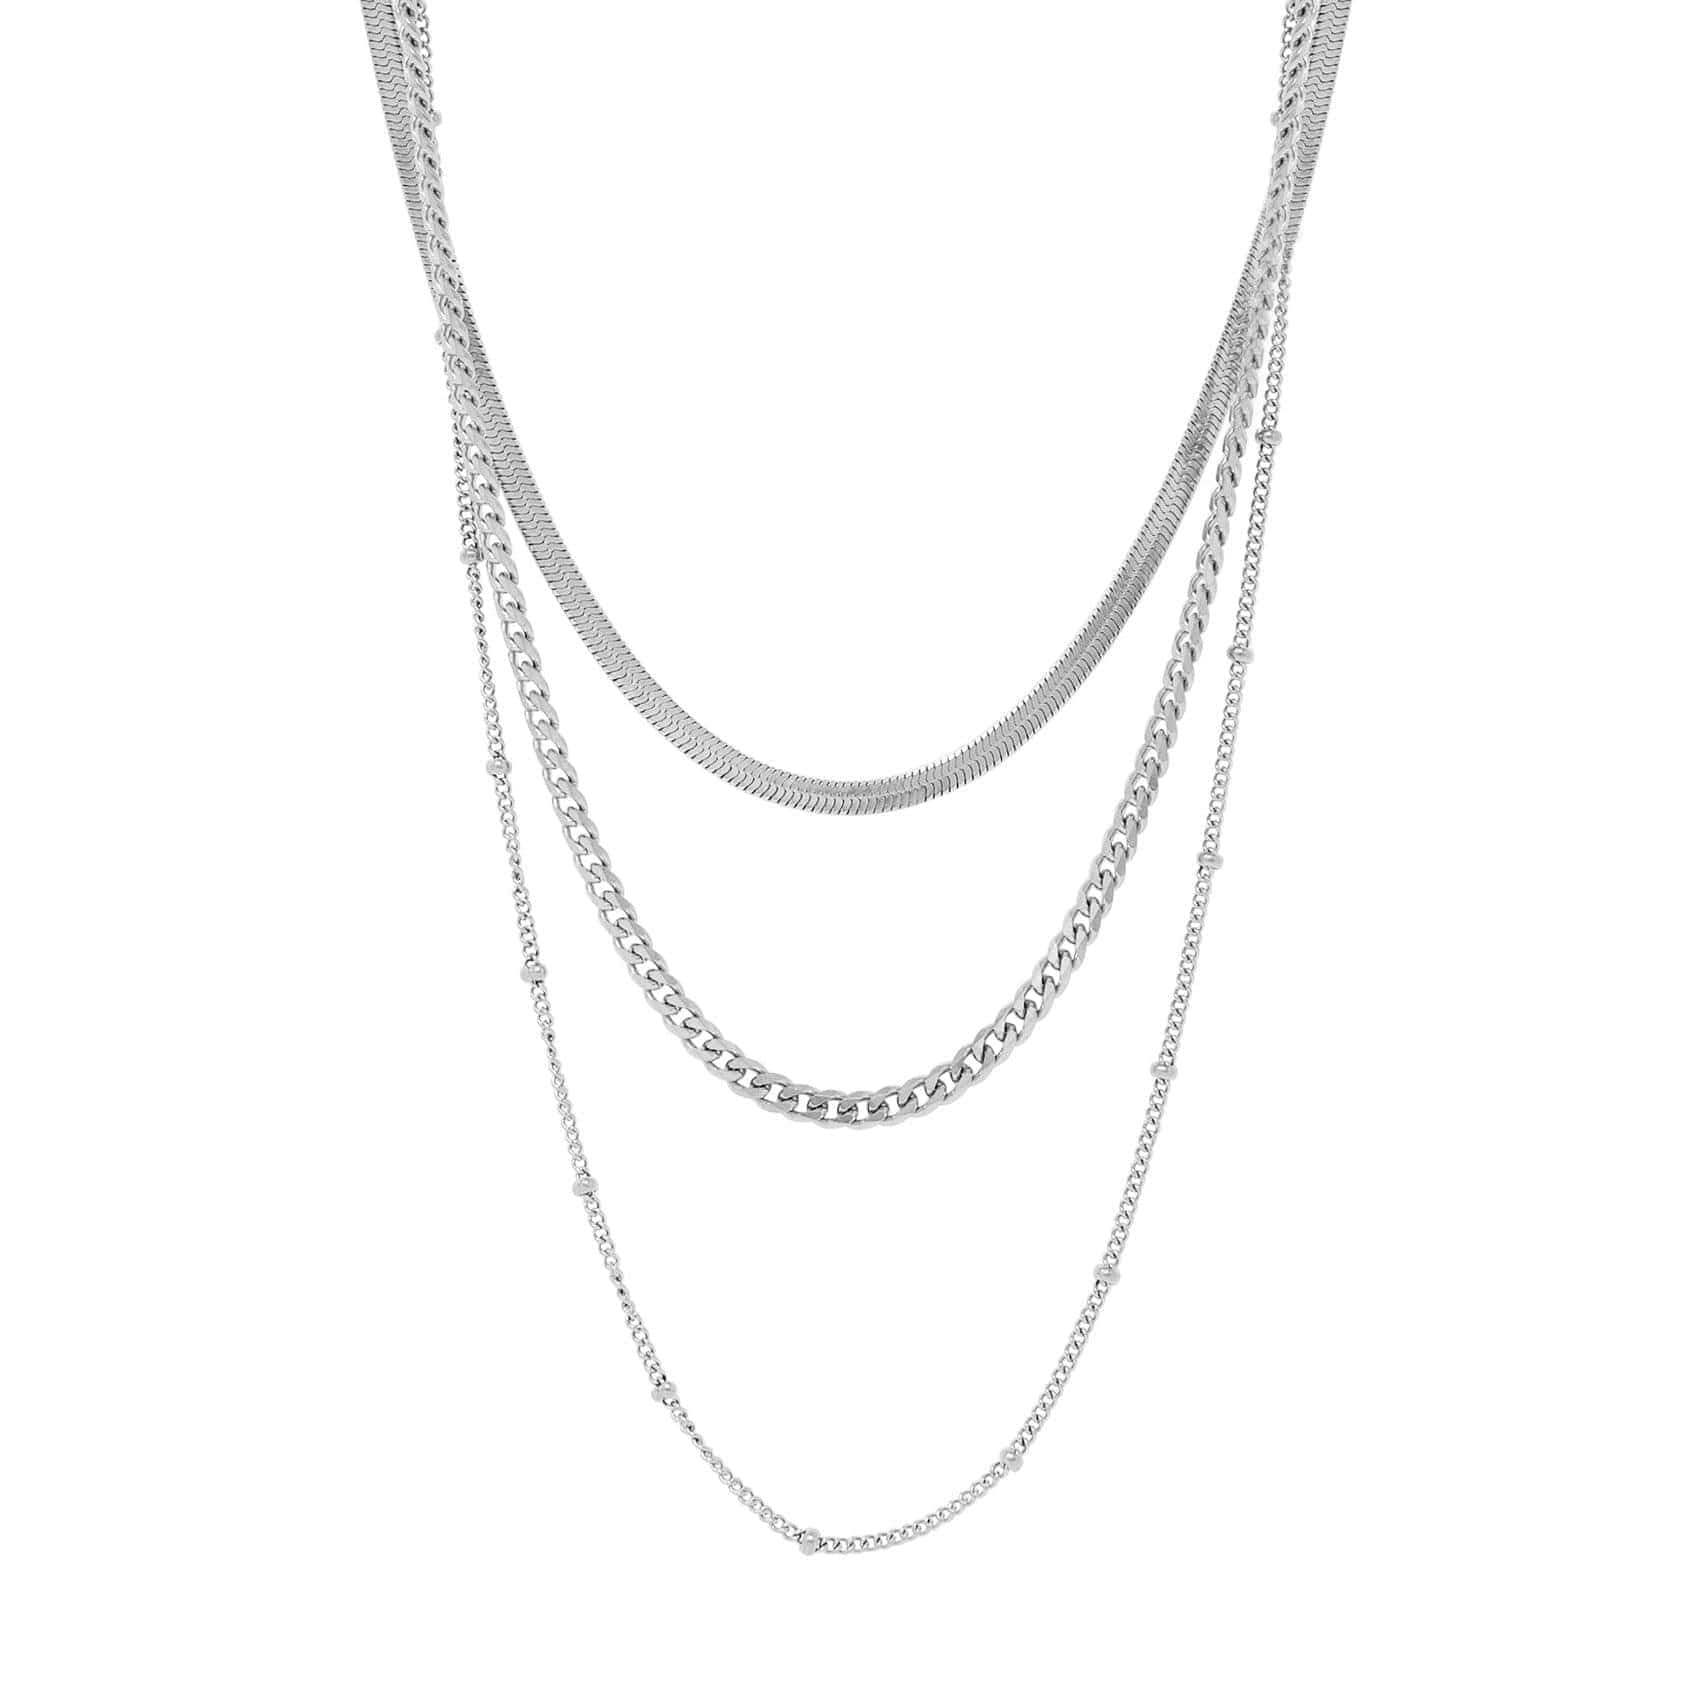 BohoMoon Stainless Steel Everly Layered Necklace Silver